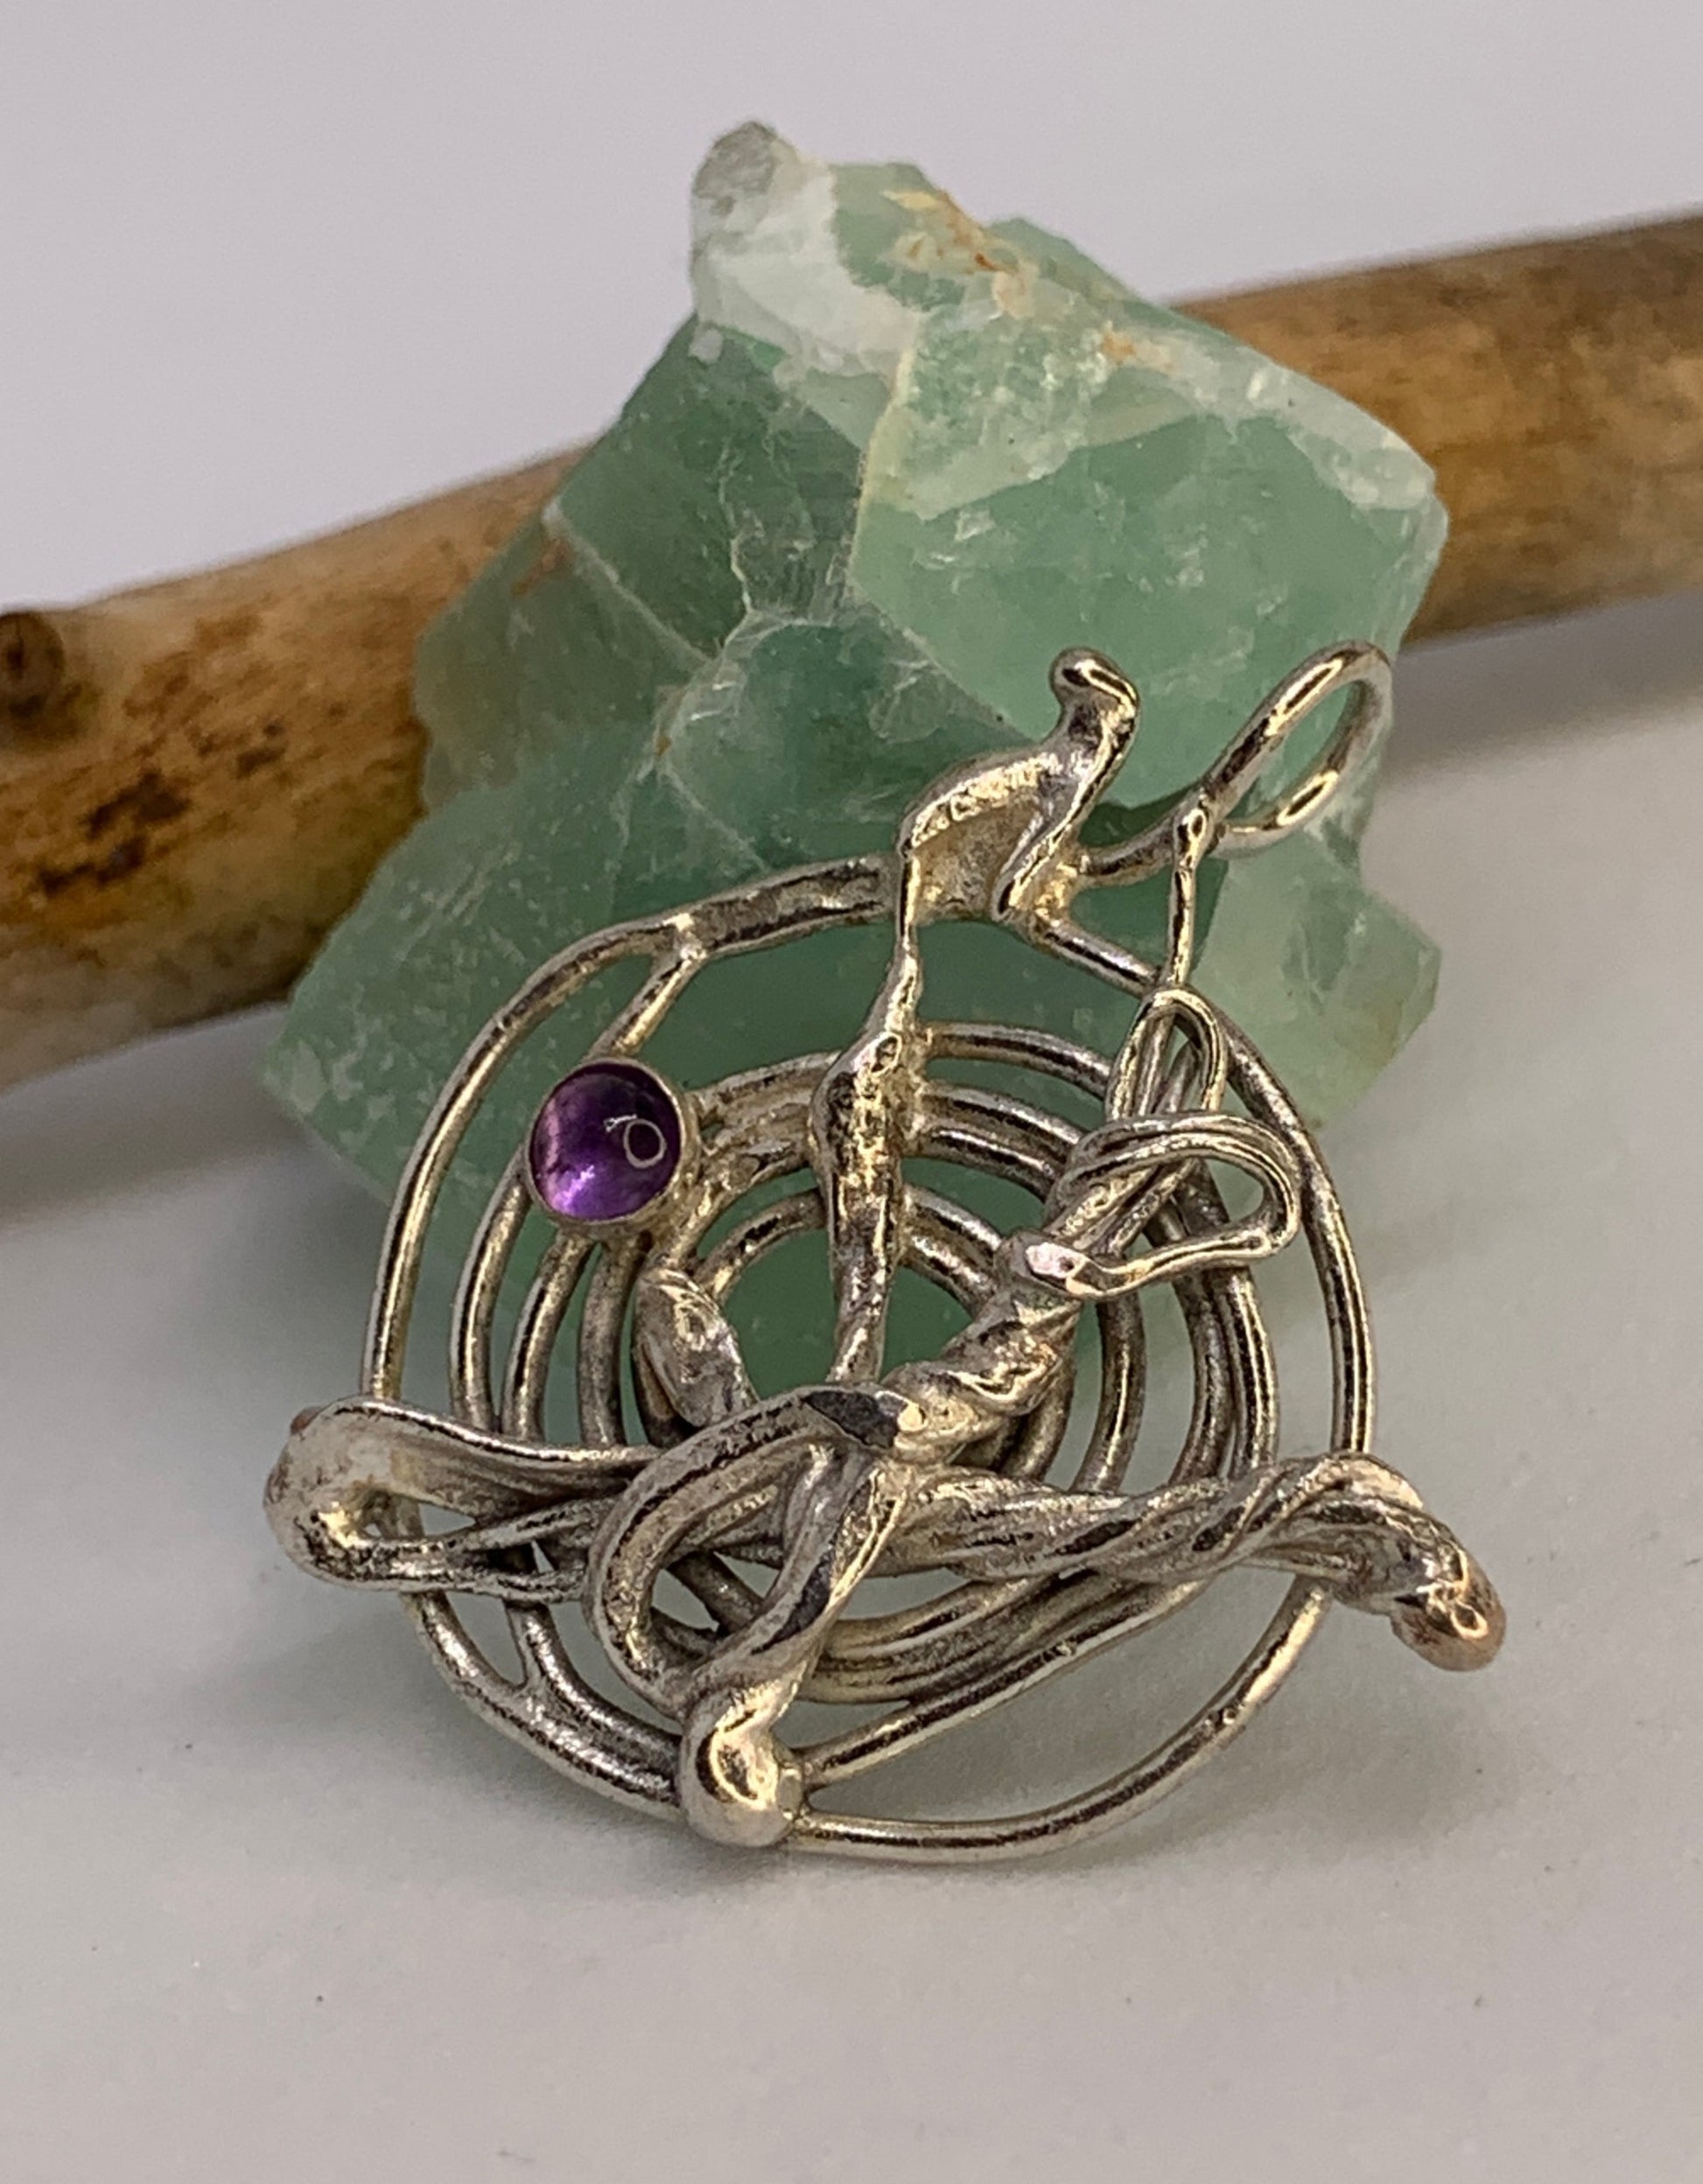 Spiral Abstract Amethyst Sterling Silver Pendant. Handmade and one of a kind. no two pieces are alike. This is an abstract fused spiral pendant, chain not included.